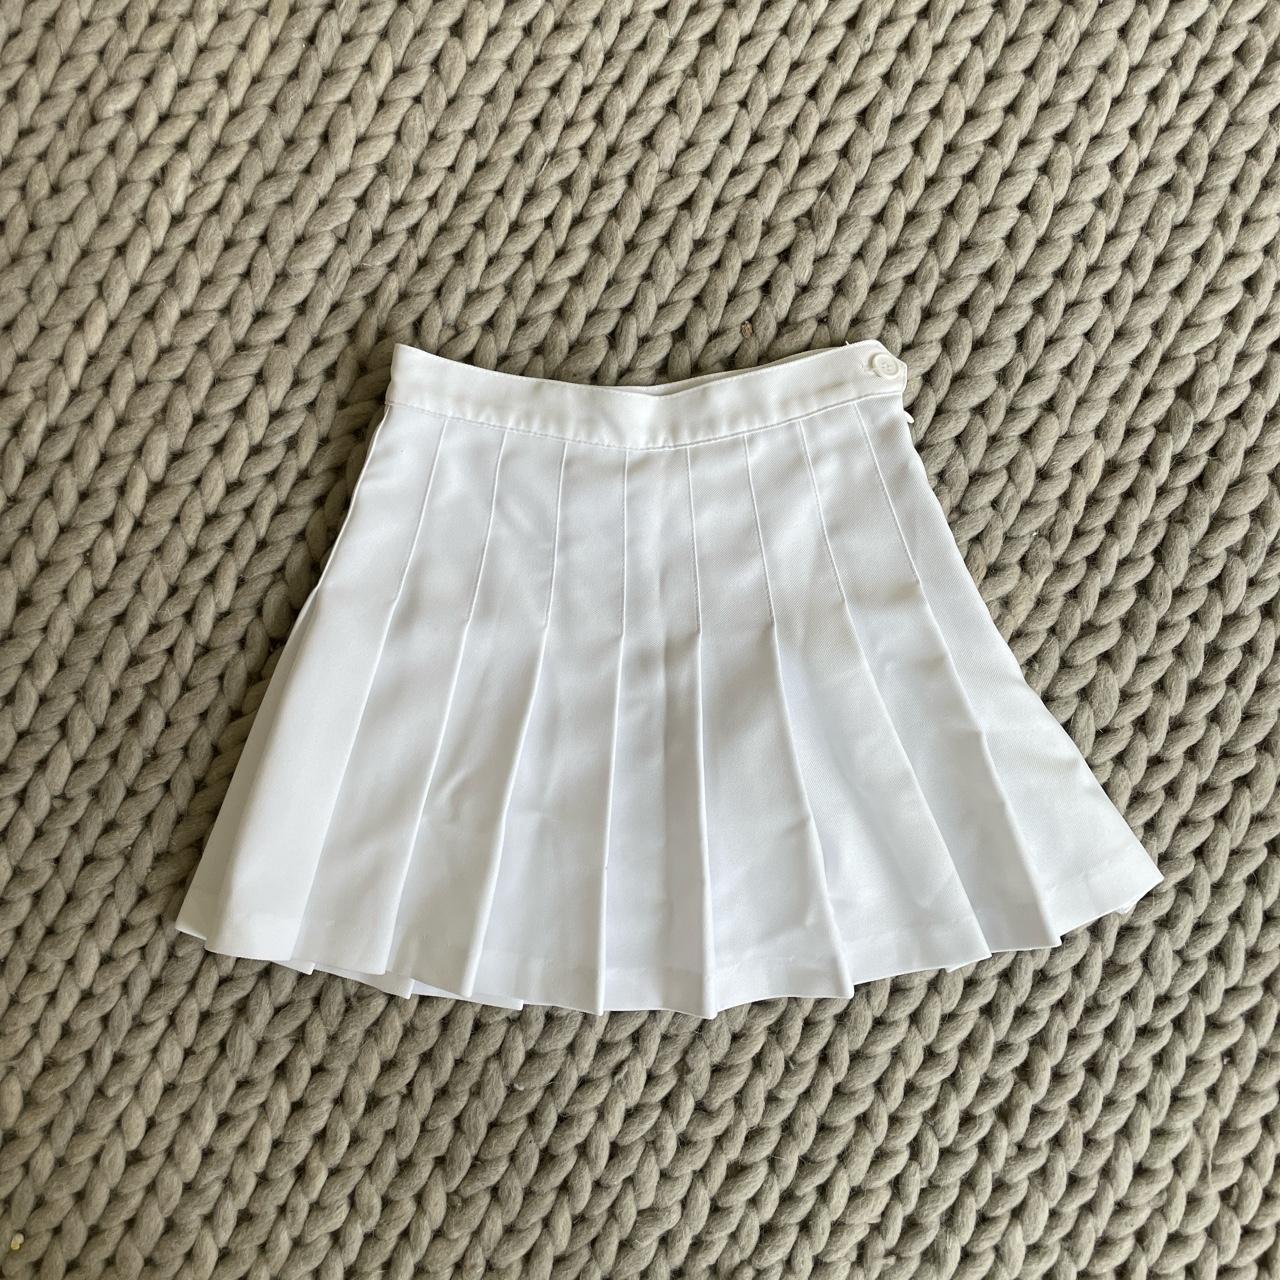 american apparel pleated skirt - small stain see photos - Depop